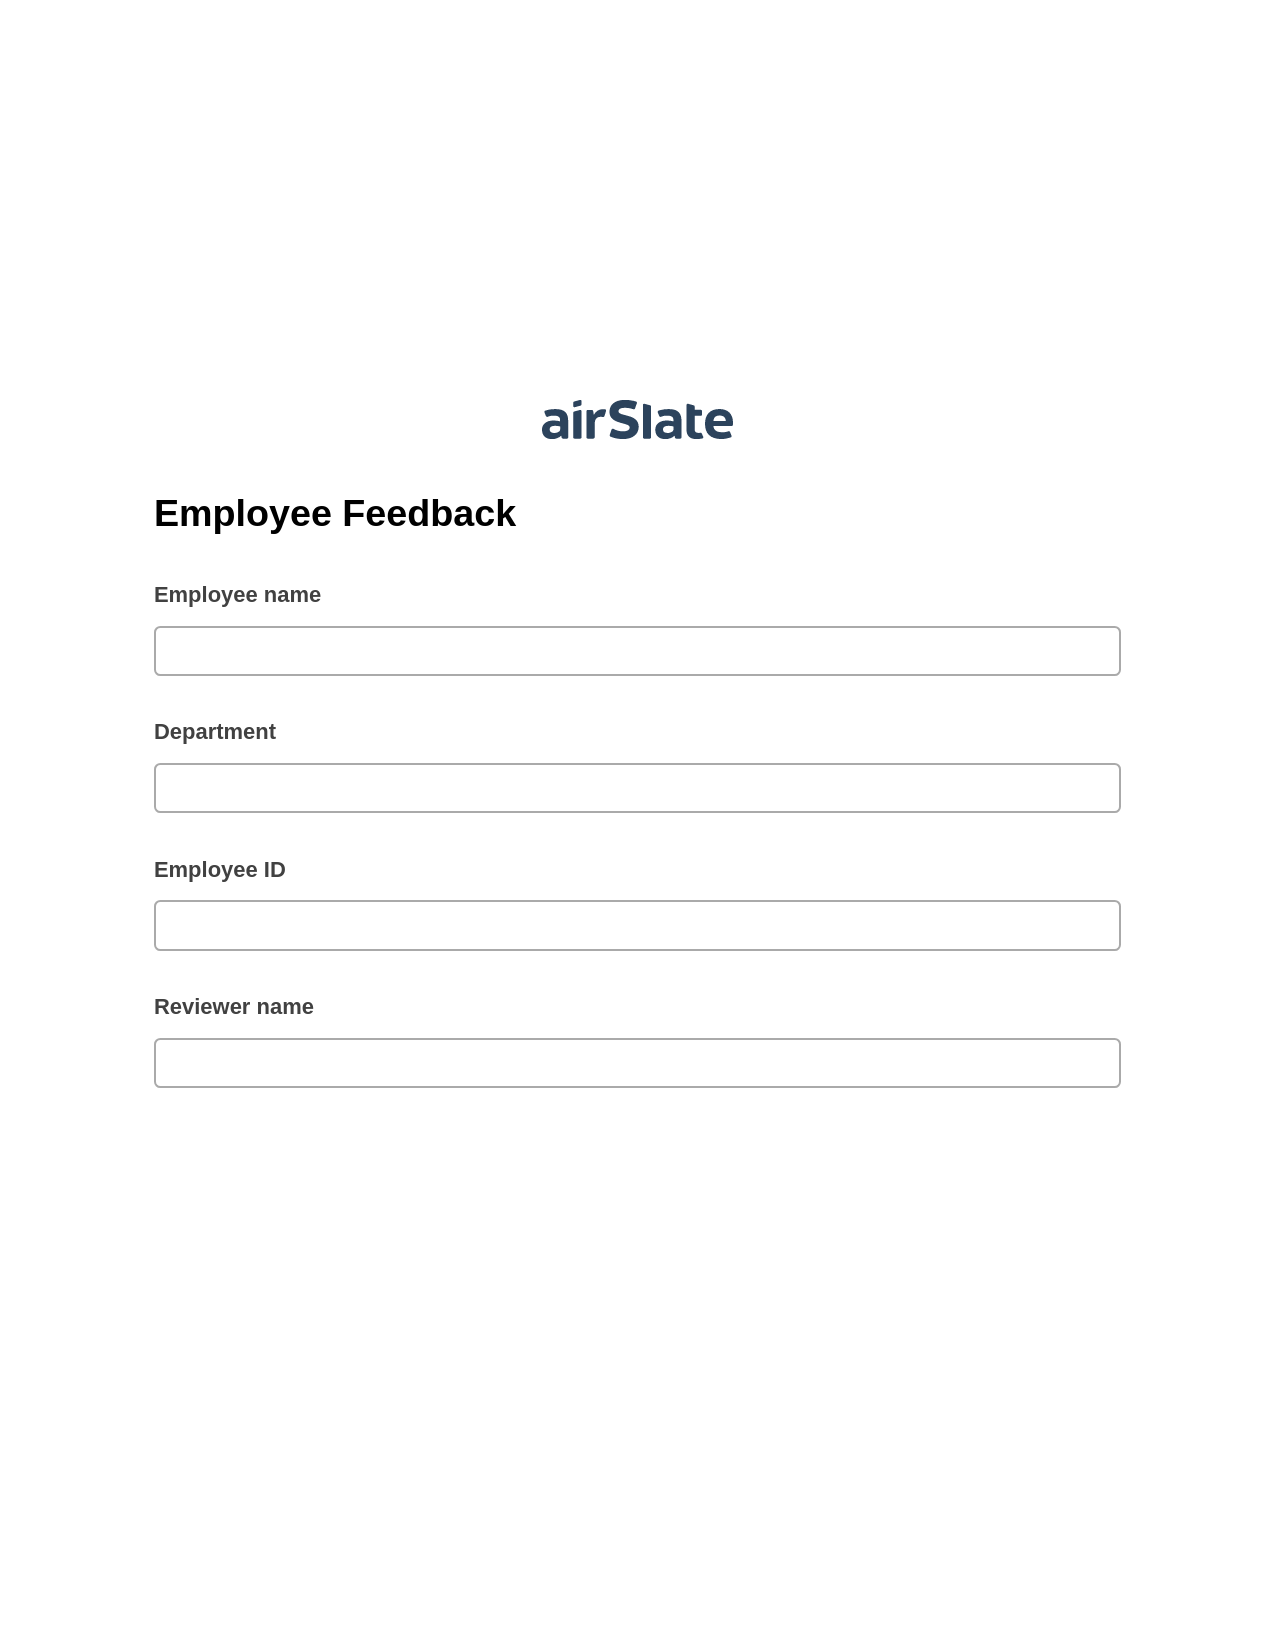 Multirole Employee Feedback Pre-fill Slate from MS Dynamics 365 Records Bot, Update NetSuite Records Bot, Export to Google Sheet Bot